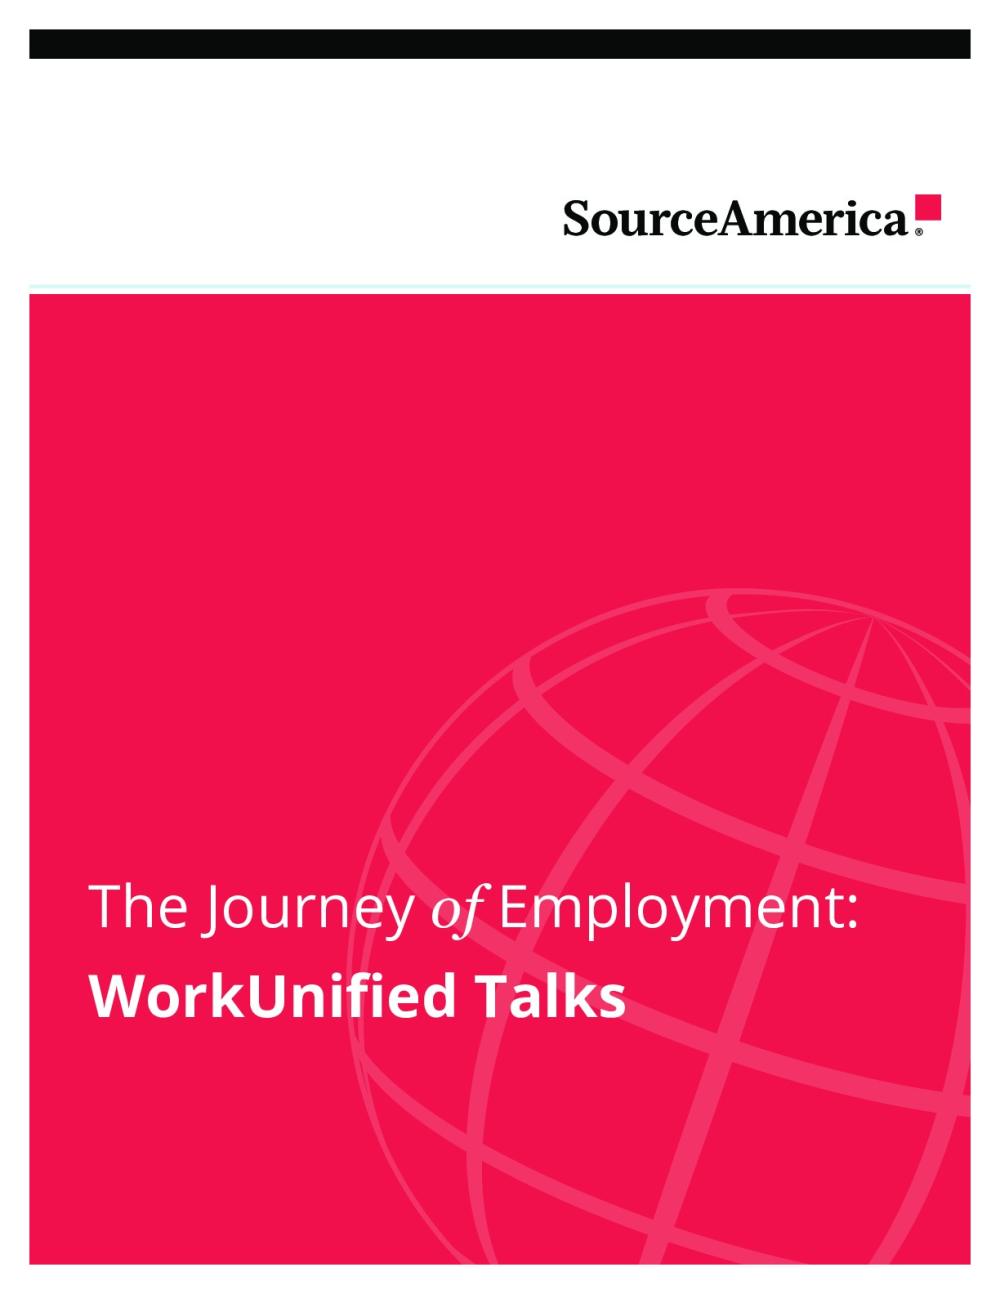 The Journey of Employment: WorkUnified Talks